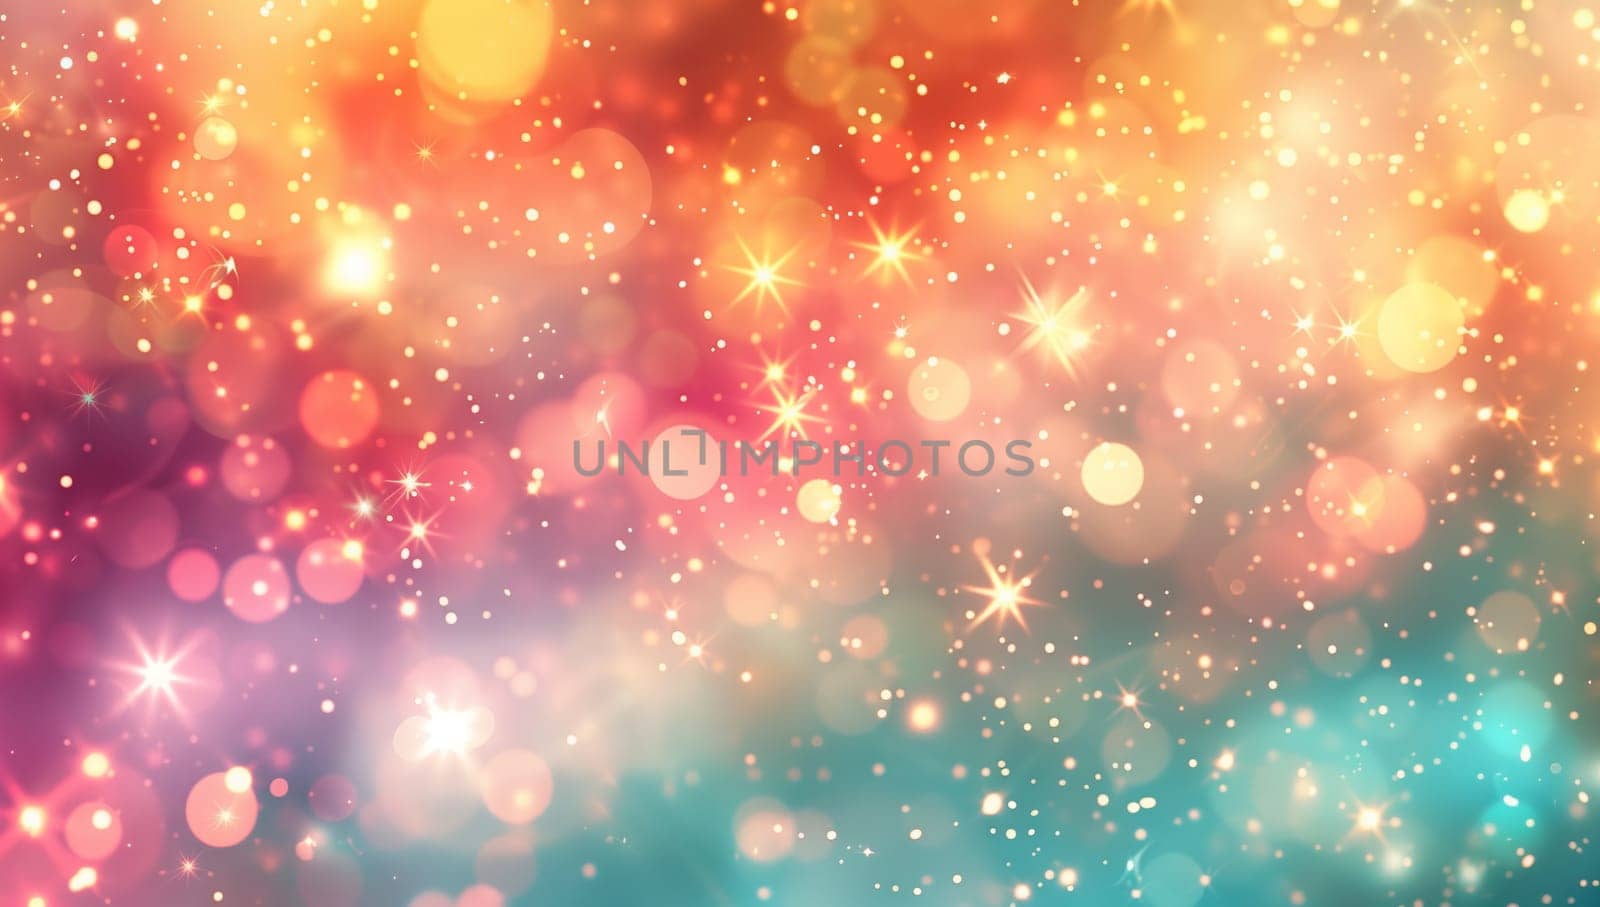 Vibrant backdrop filled with dazzling lights, stars, and colorful patterns by richwolf